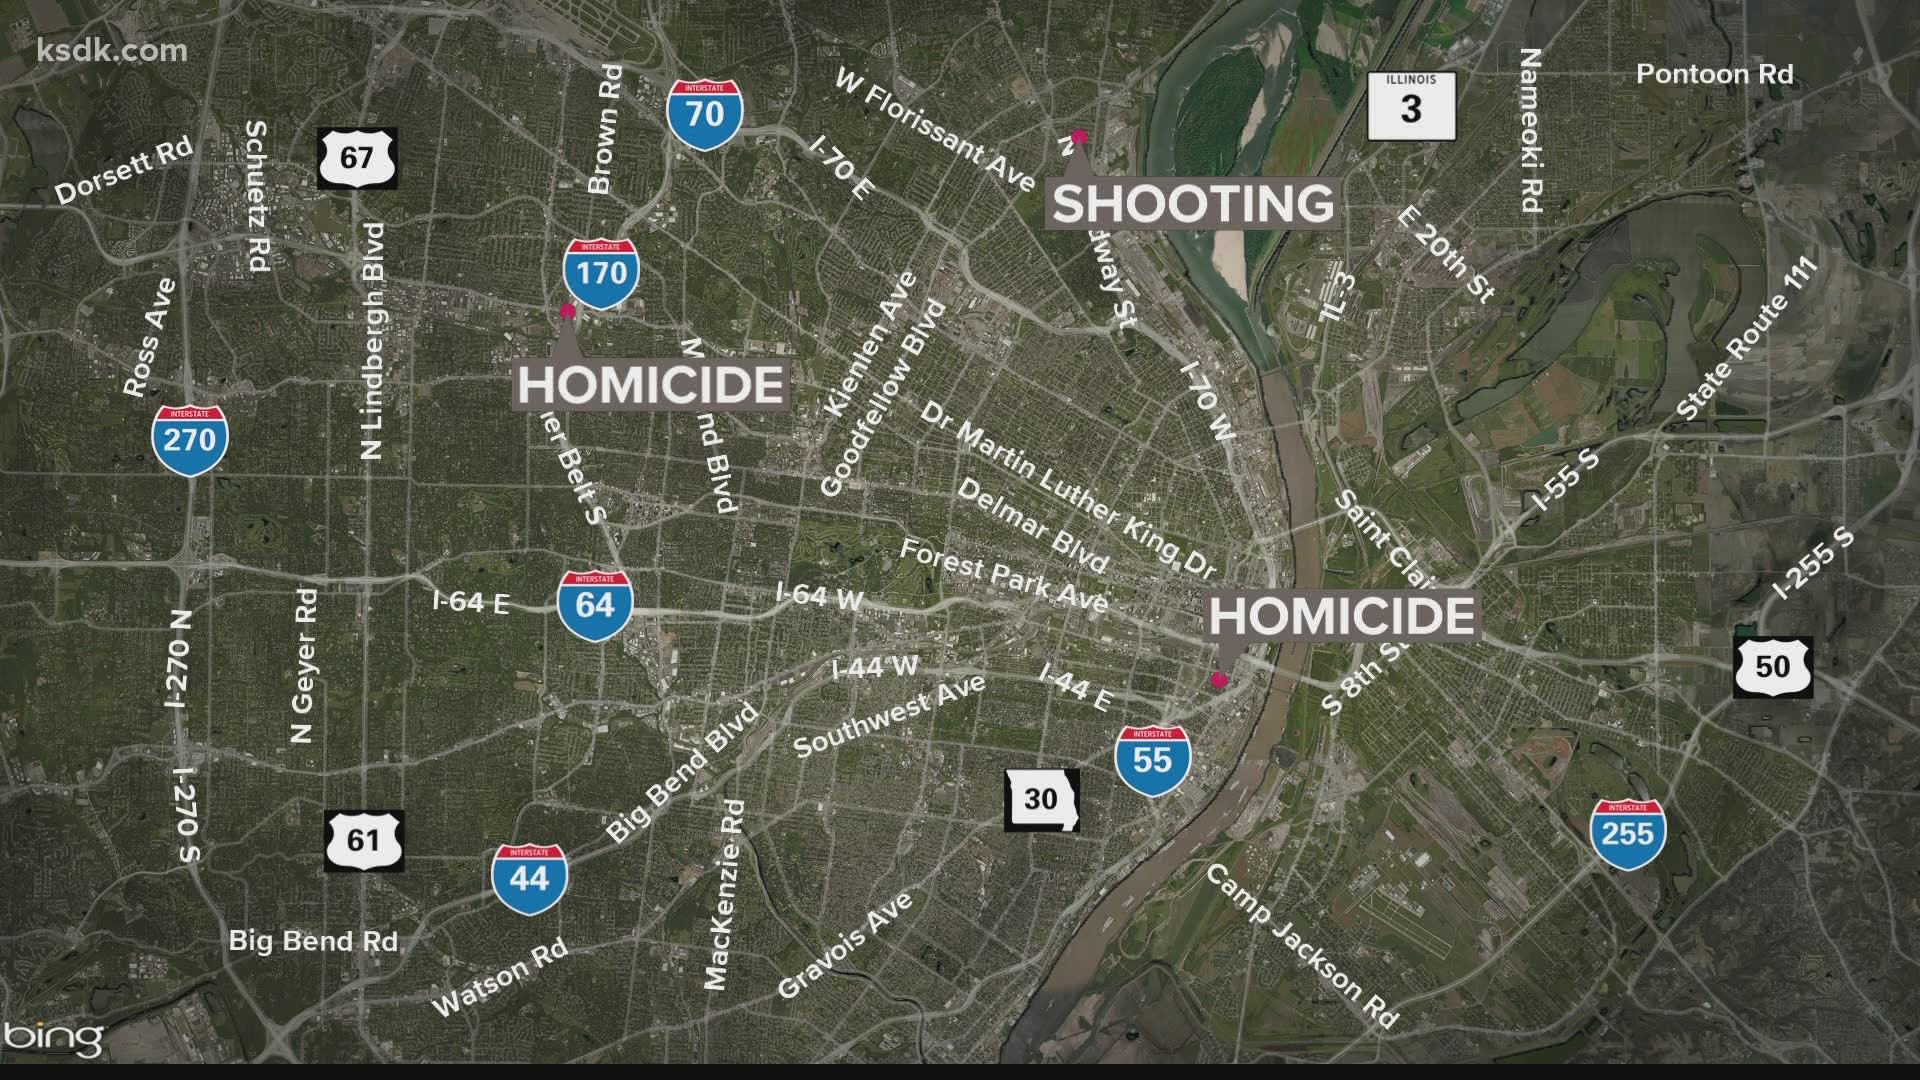 That death in St. Louis, brings the homicide total to 220 so far this year. At this time last year, we were at 164.